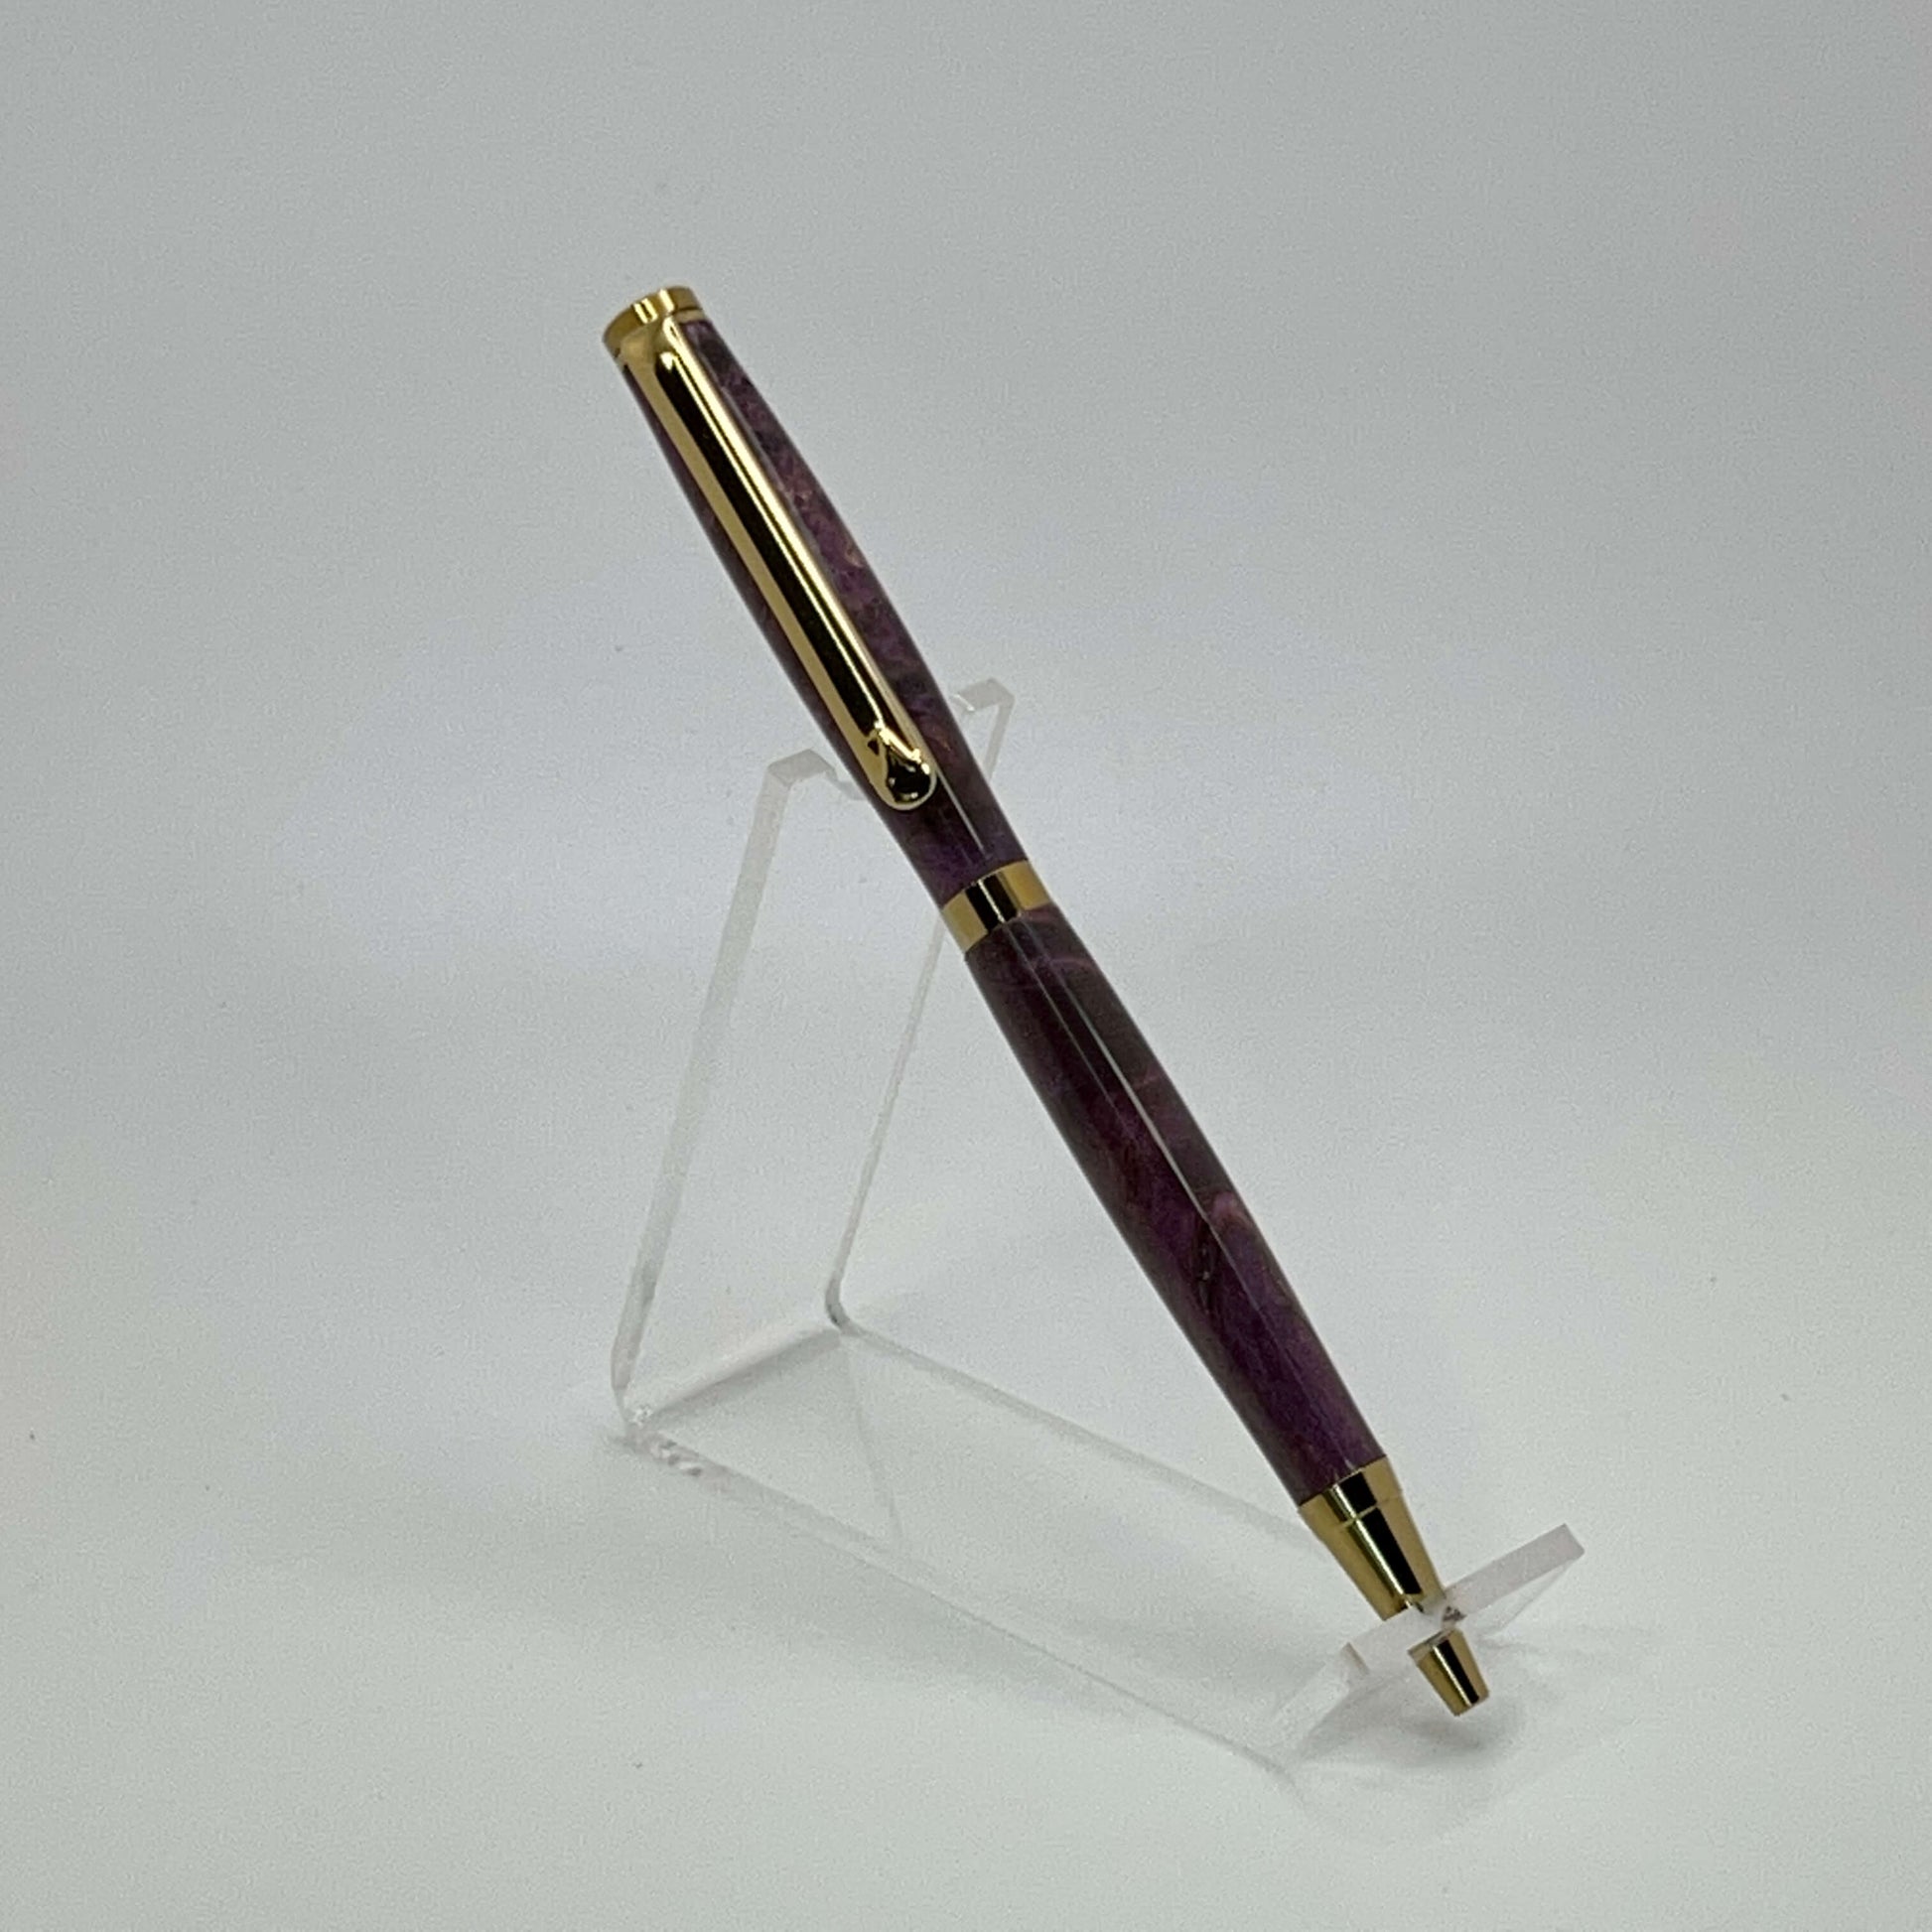 Right side view of handcrafted pen with Box Elder Burl wood dyed purple